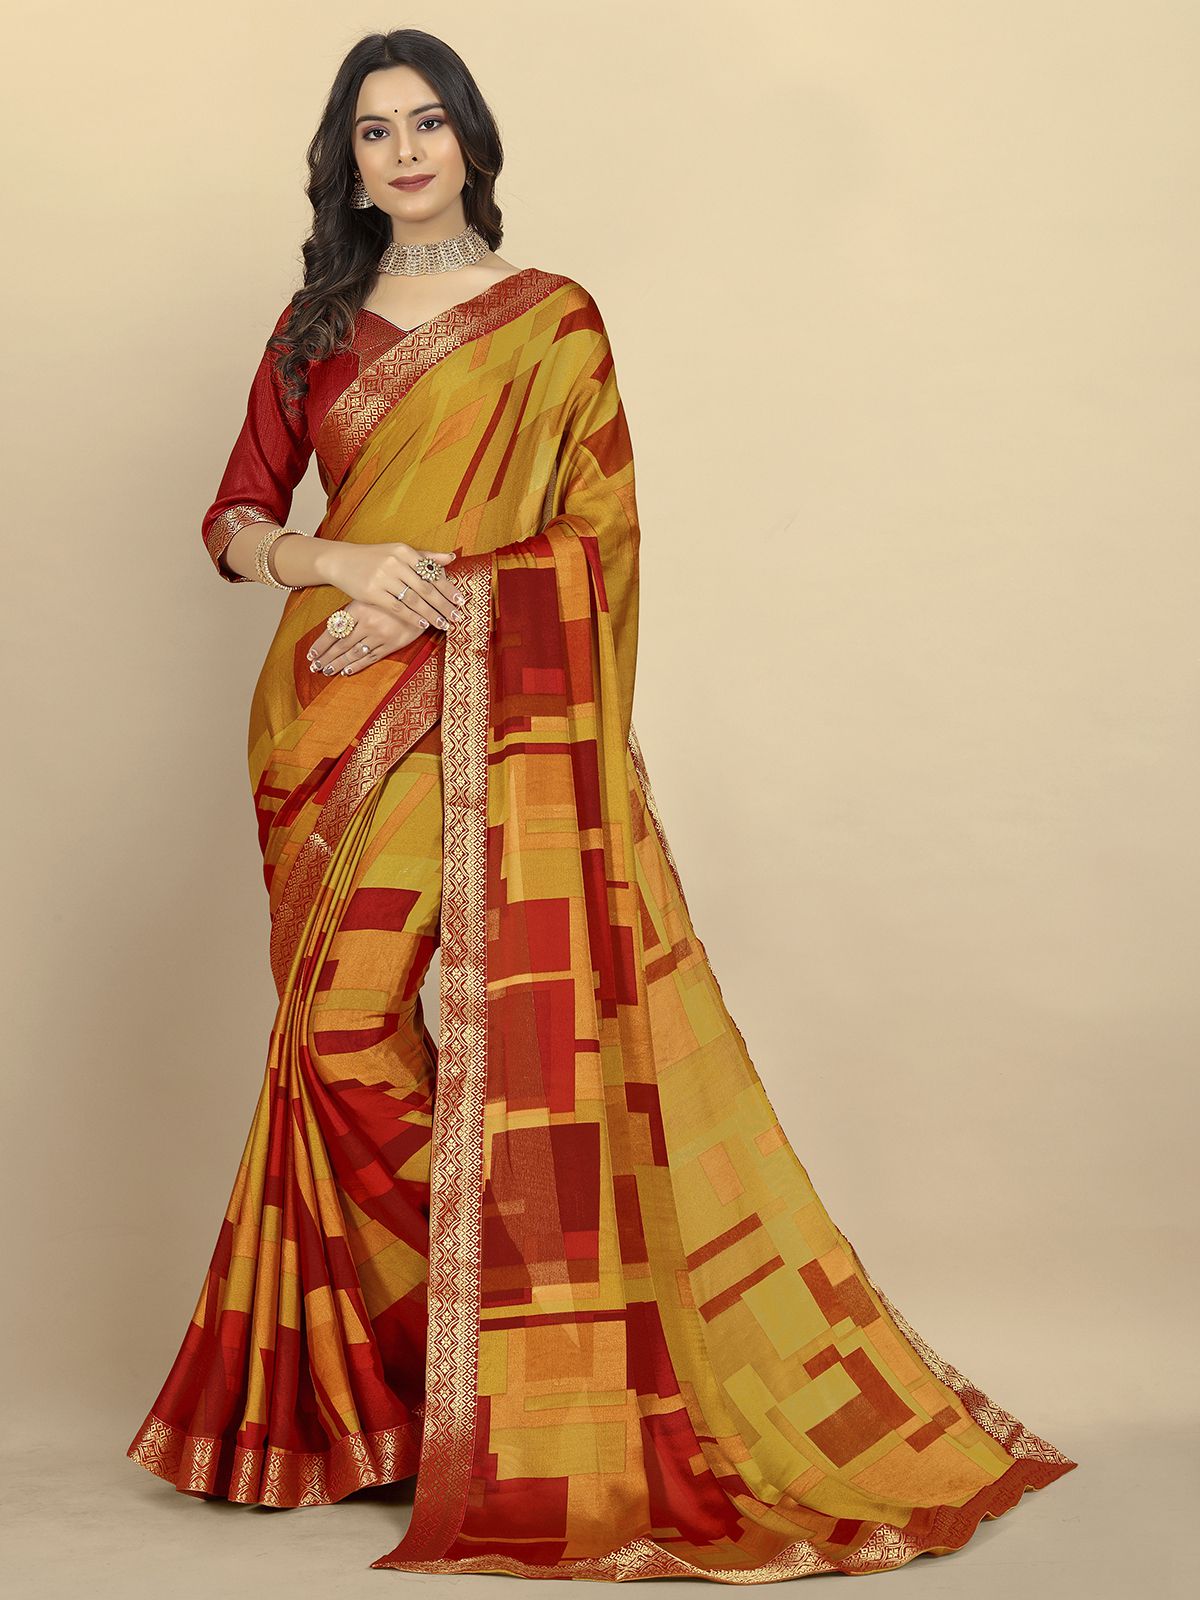 Rangita Women Abstract Printed Moss Georgette Saree With Blouse Piece - Yellow